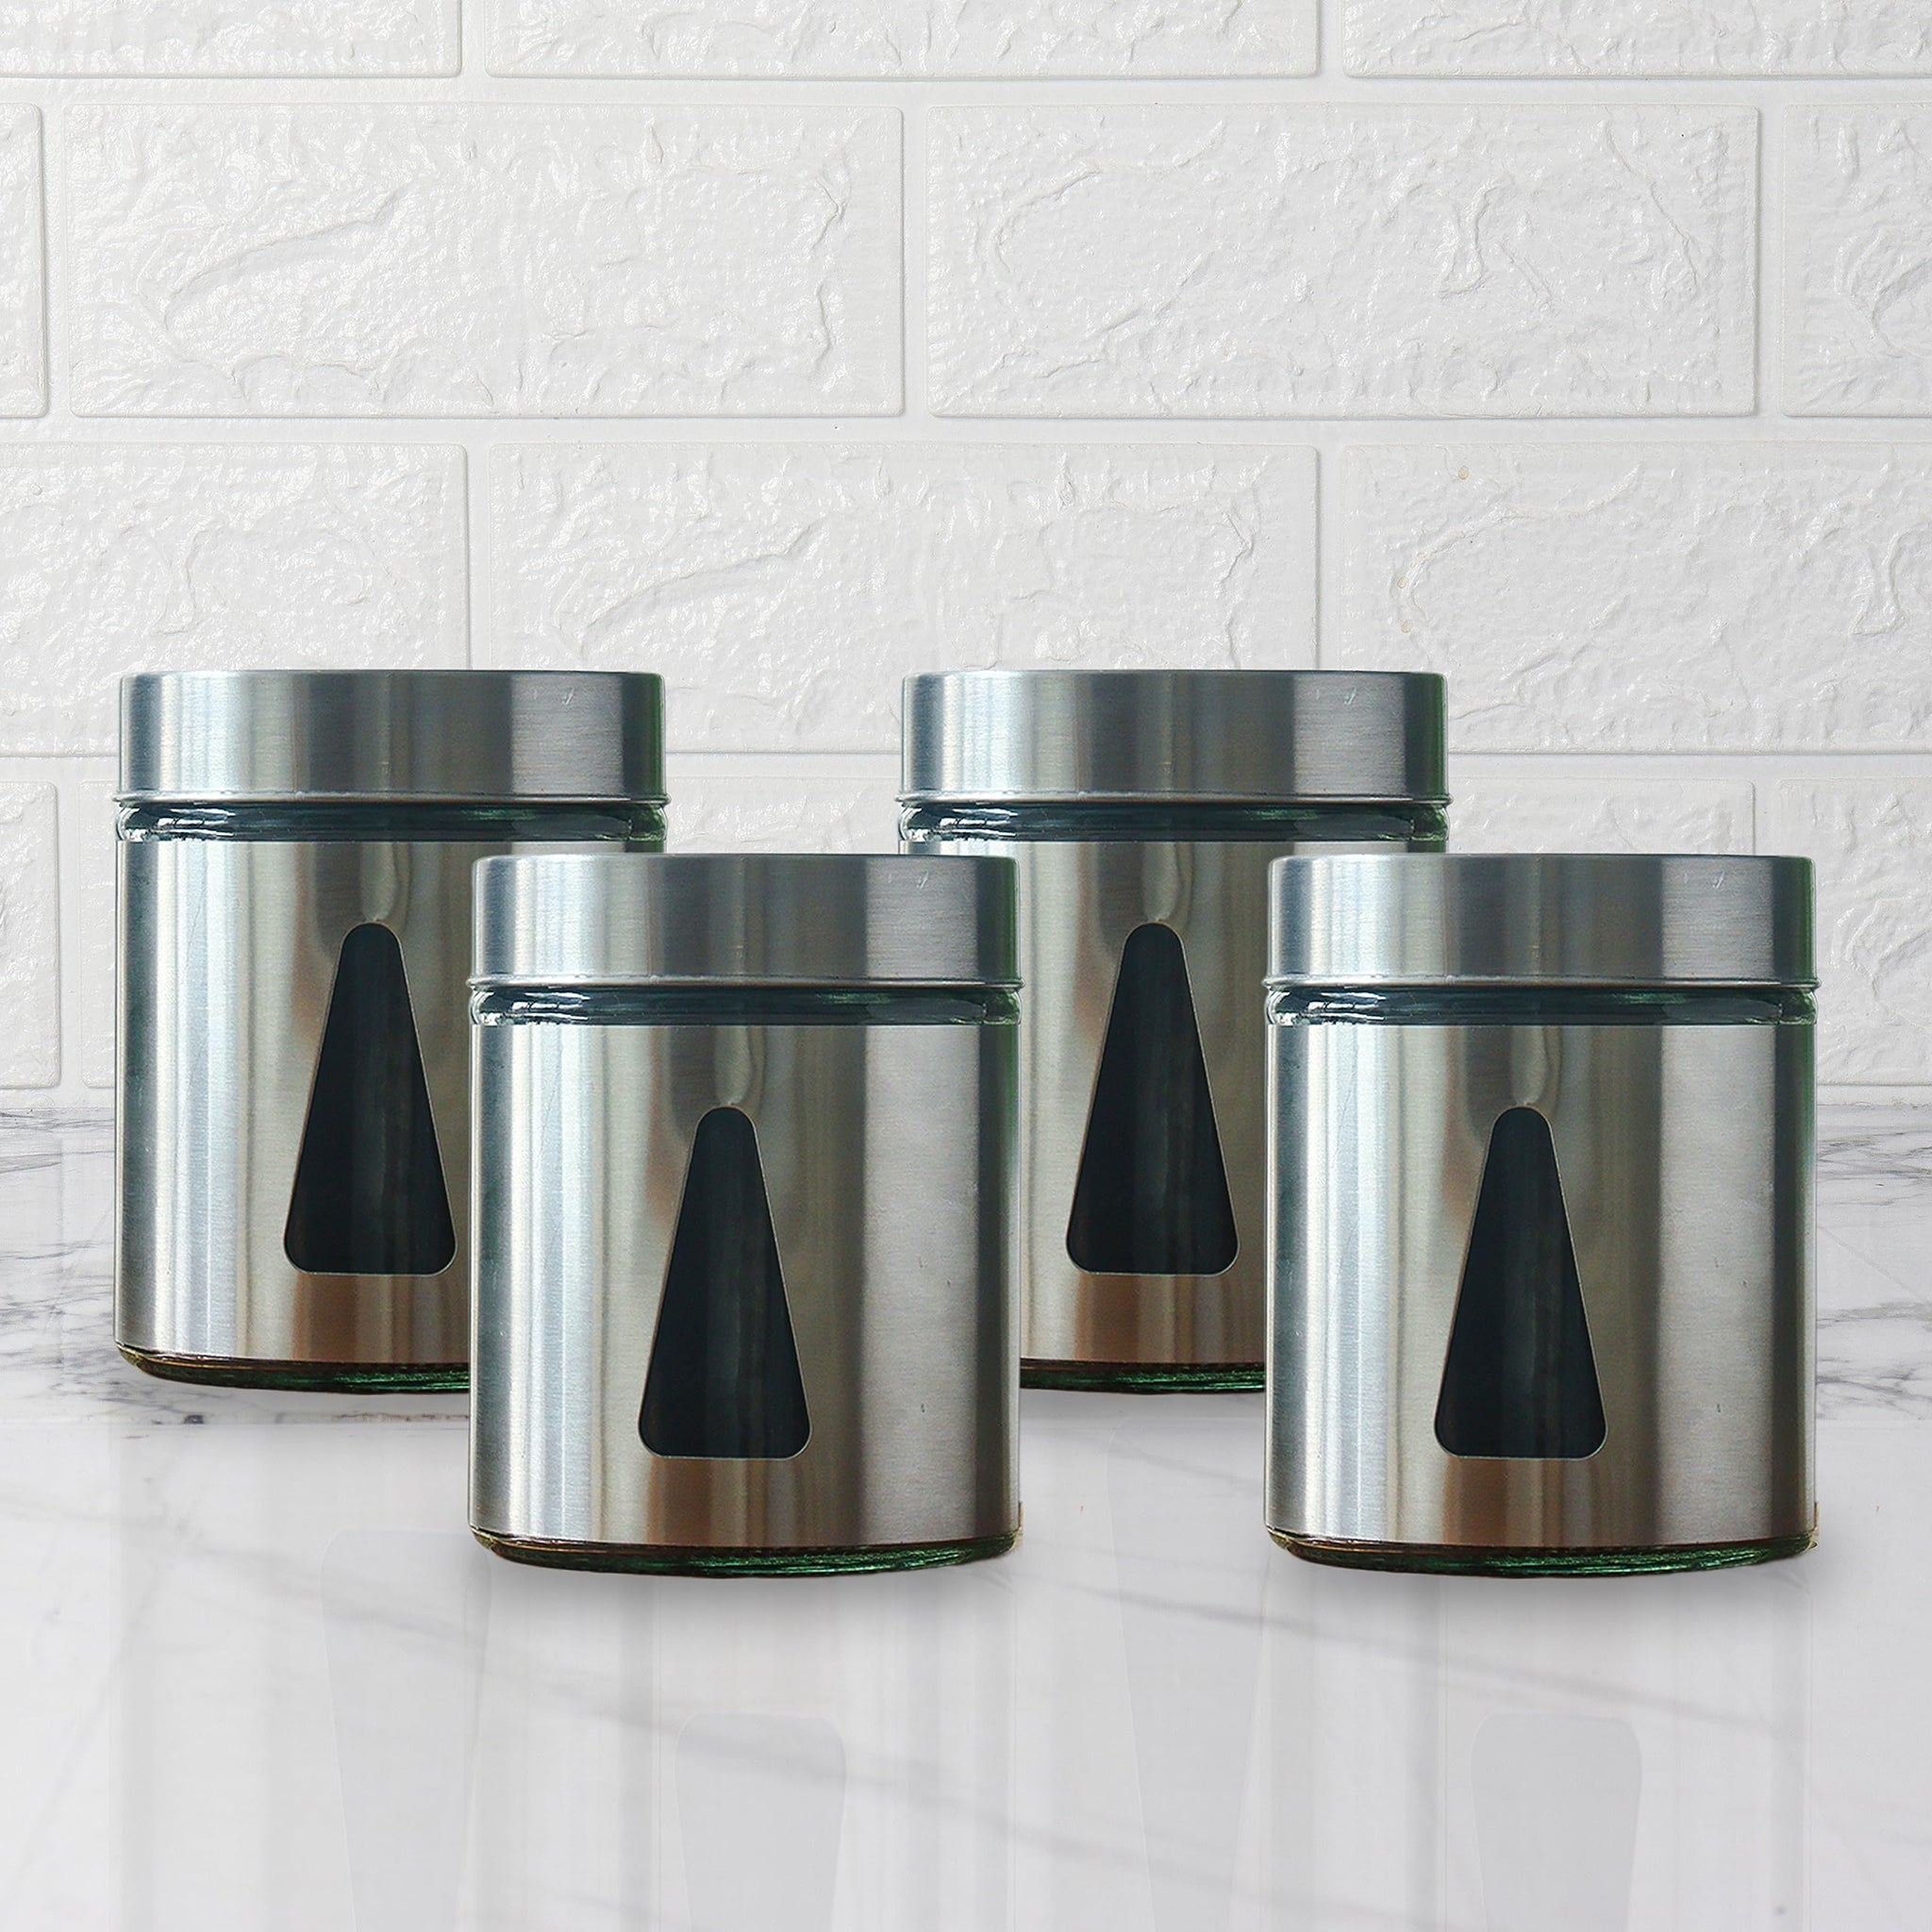 Femora Steel Jar for Kitchen Storage with Triangle Glass Window and Stainless Steel Cover, 1000 ml, Set Of 4, Free Replacement of Lids